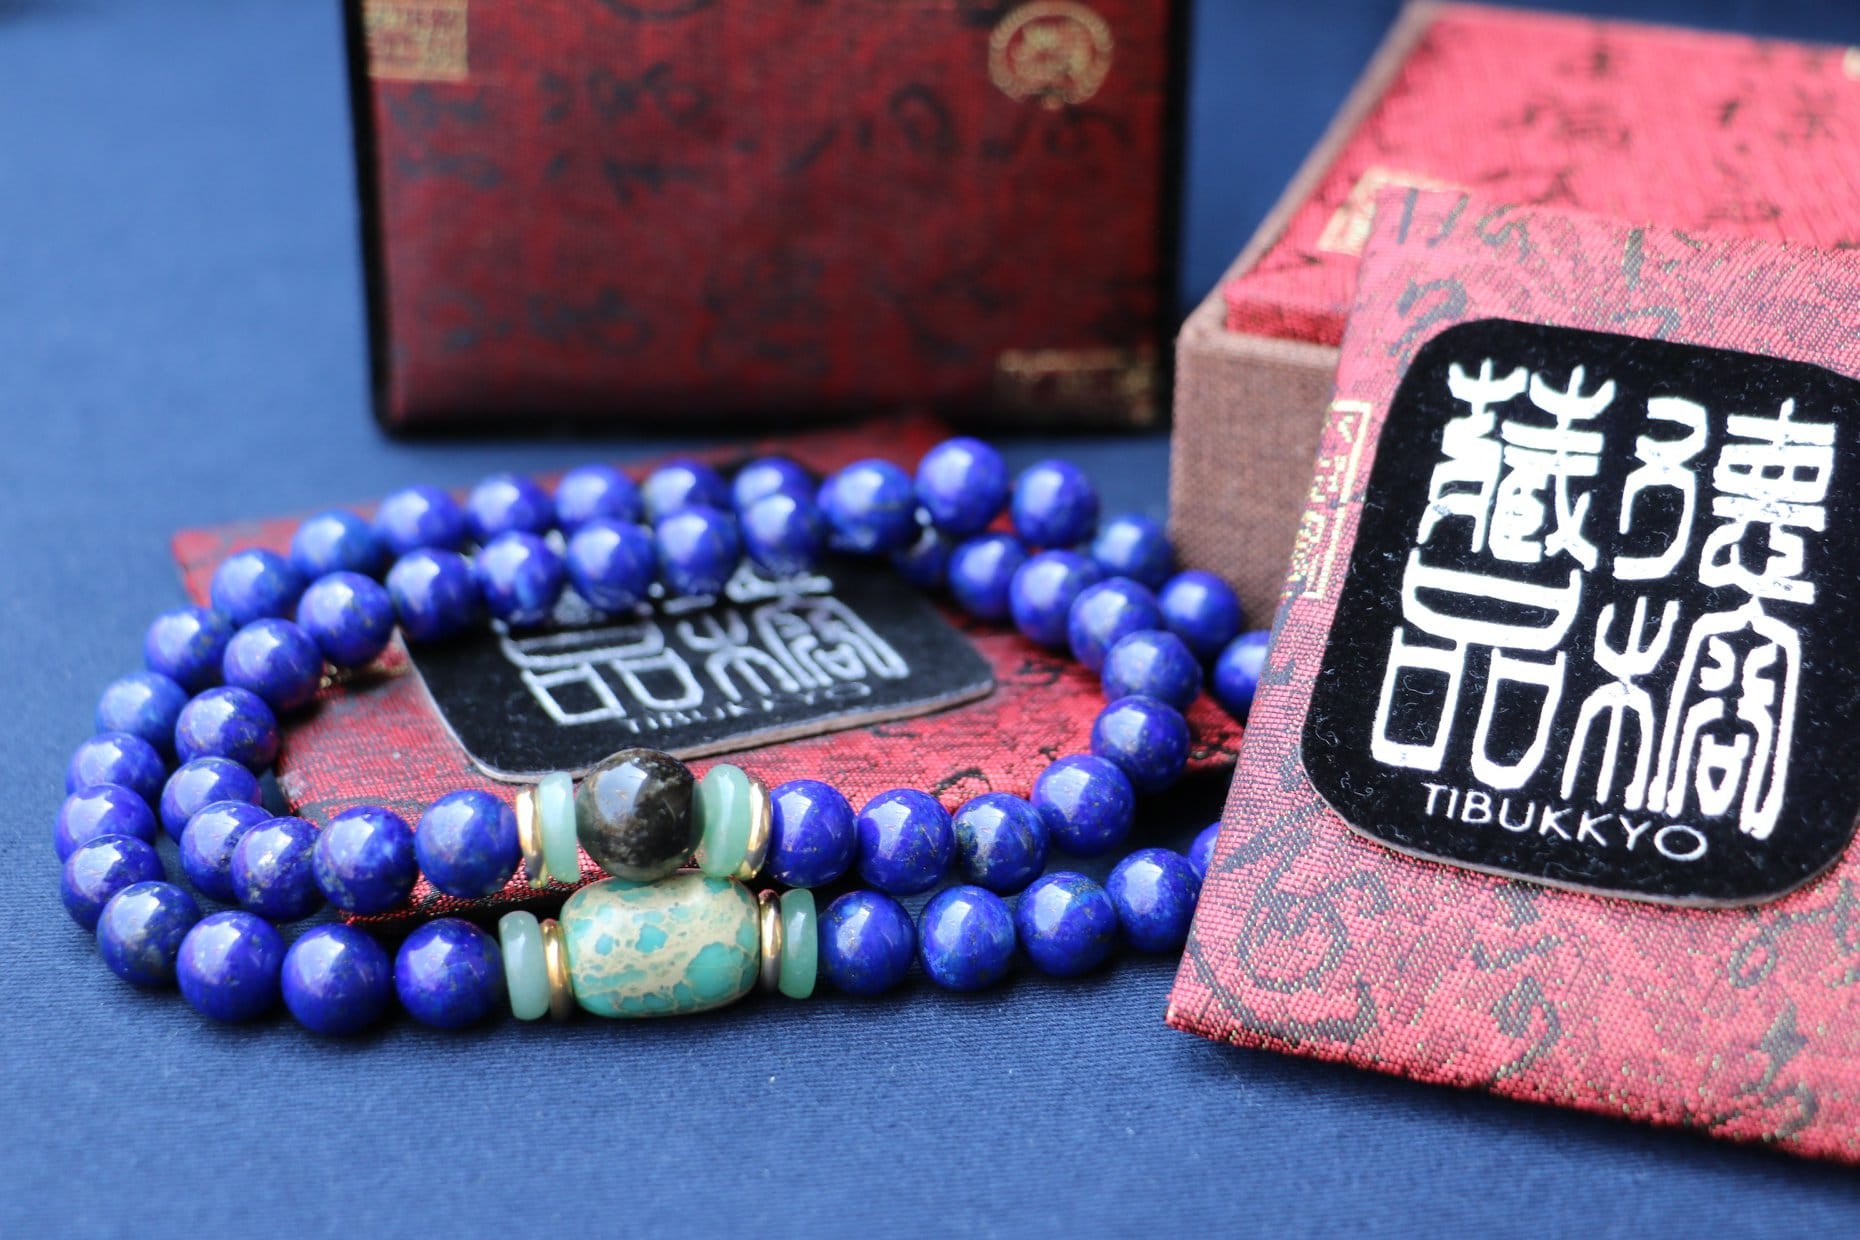 Taiwan Derong Collection｜Original undyed lapis lazuli hand beads 10mm54 pieces｜Less gold and less white boutique｜Emperor stone｜Obsidian beads